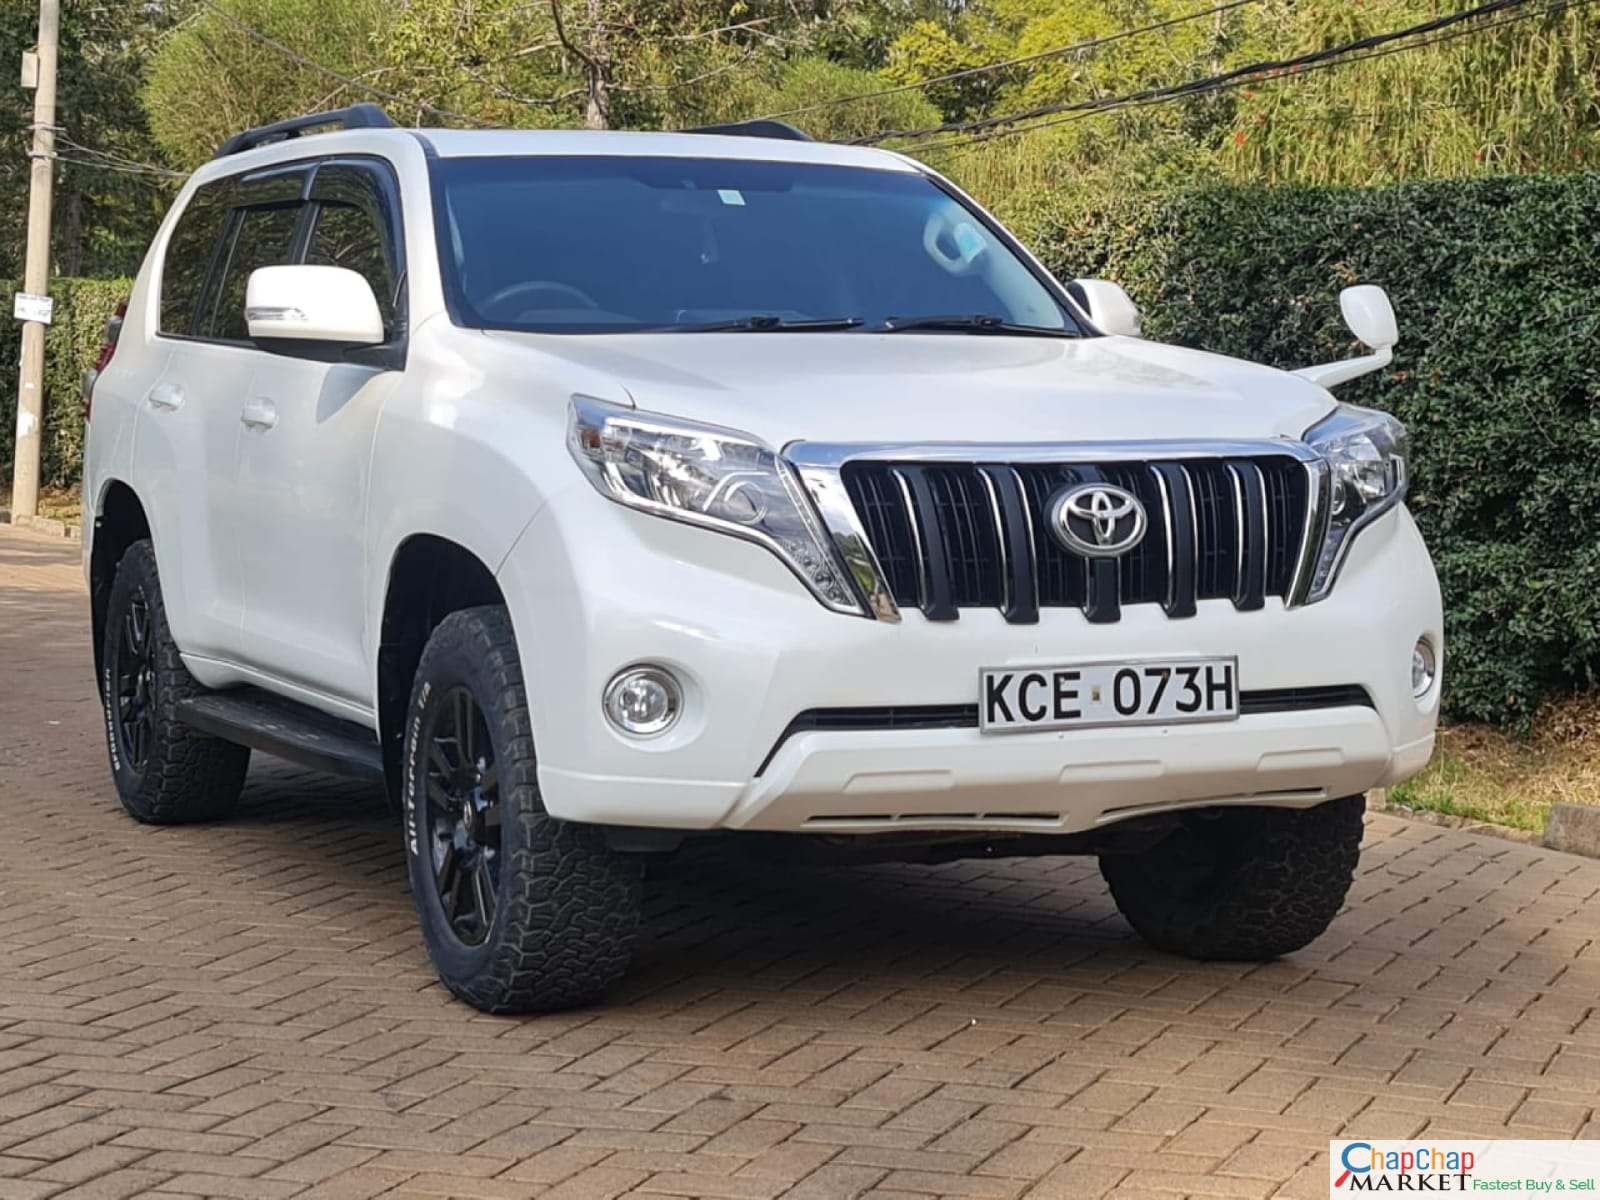 Toyota Prado j150 for sale in Kenya with SUNROOF You Pay 30% Deposit Trade in OK exclusive Hire Purchase Installments bank finance